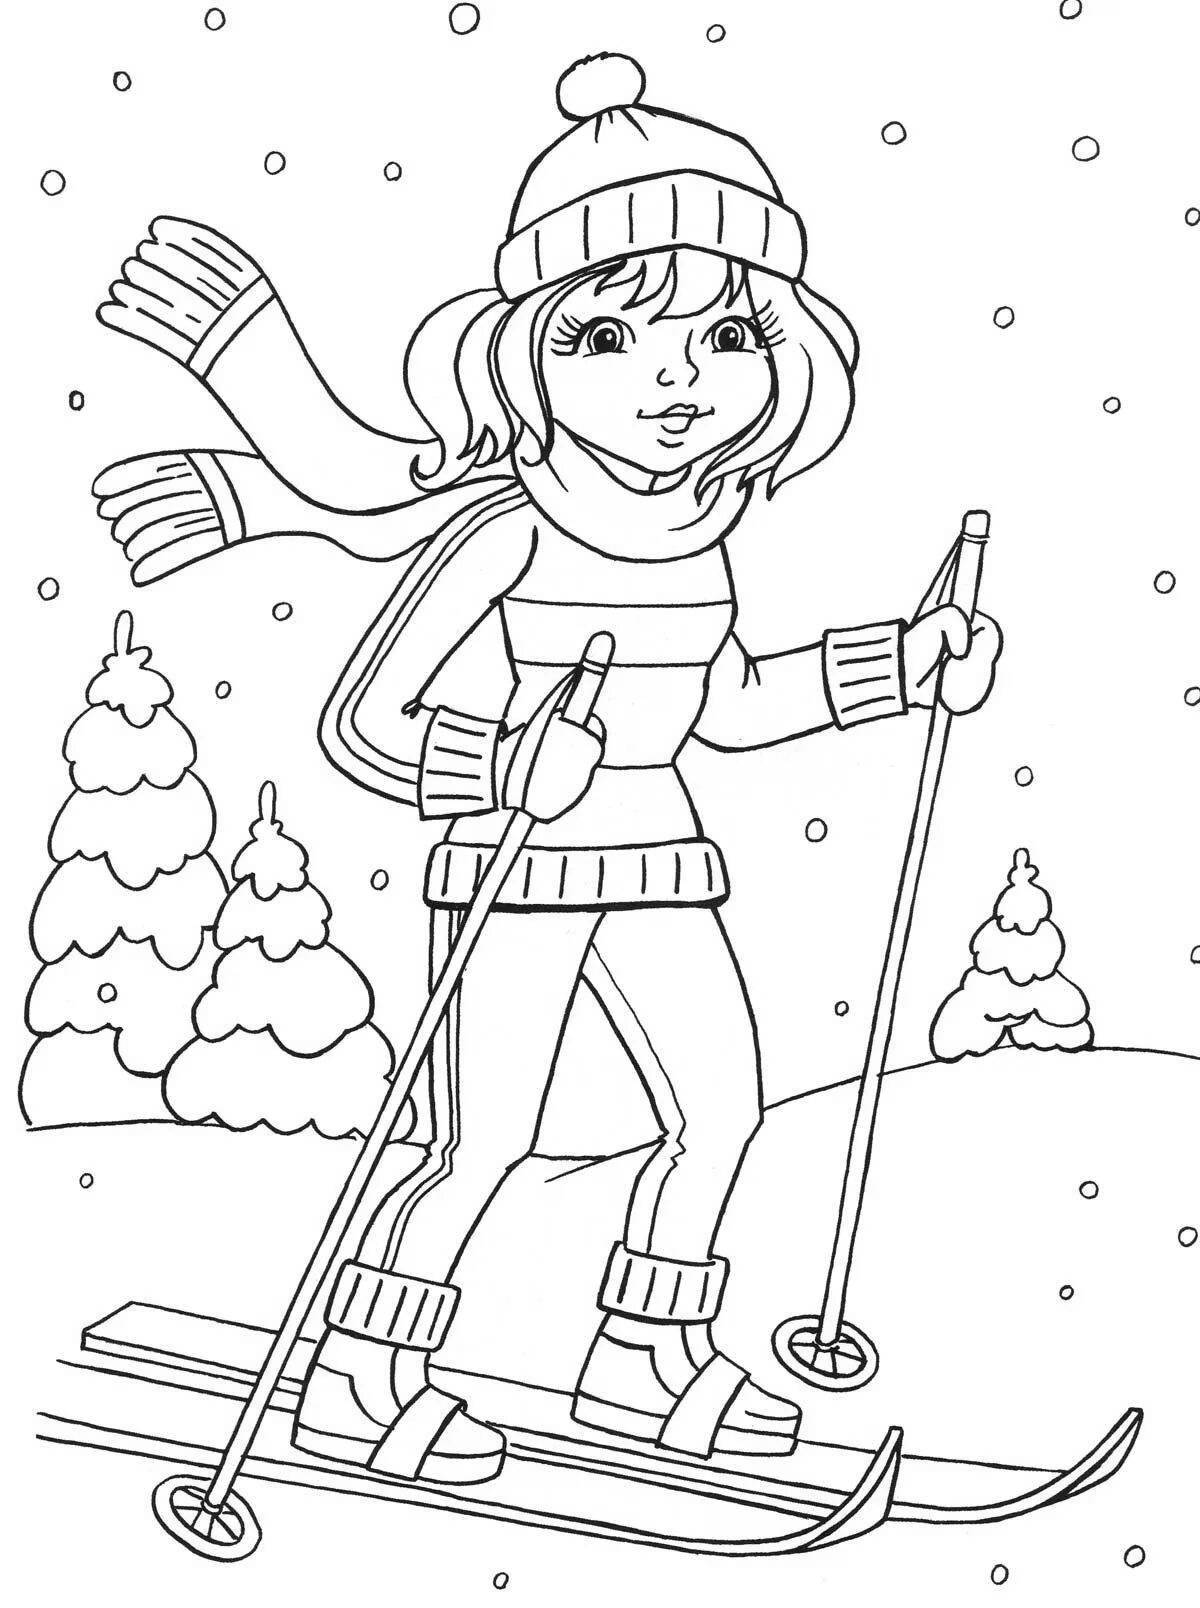 Coloring book brave skier for children 6-7 years old